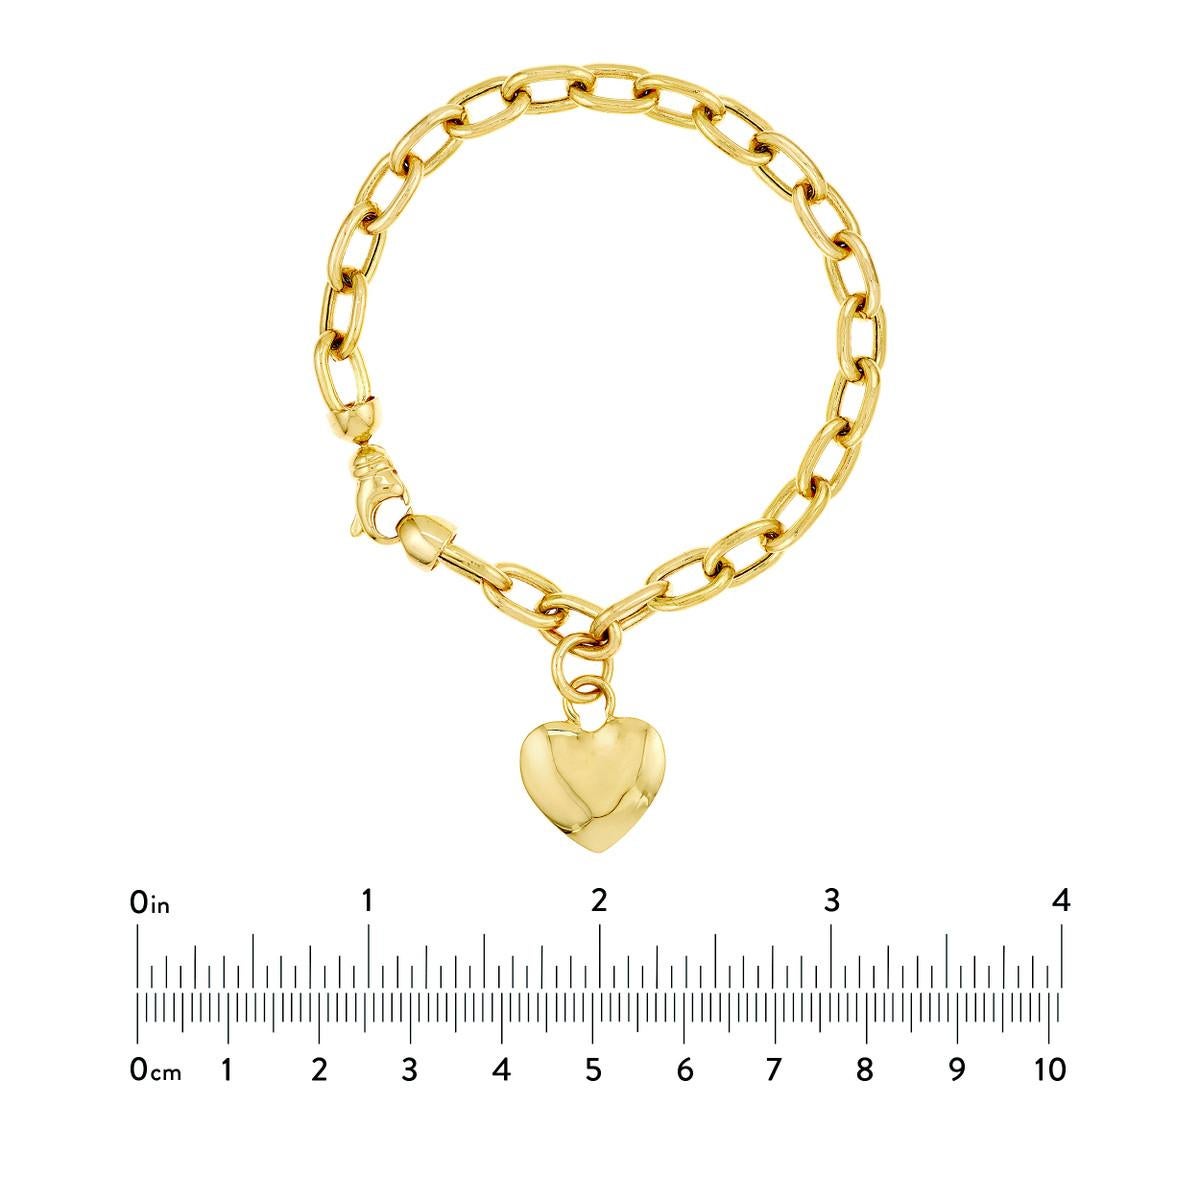 Curata 14k Yellow Gold Puffed Heart Tag Rolo Charm Bracelet In New Condition For Sale In Great Neck, NY